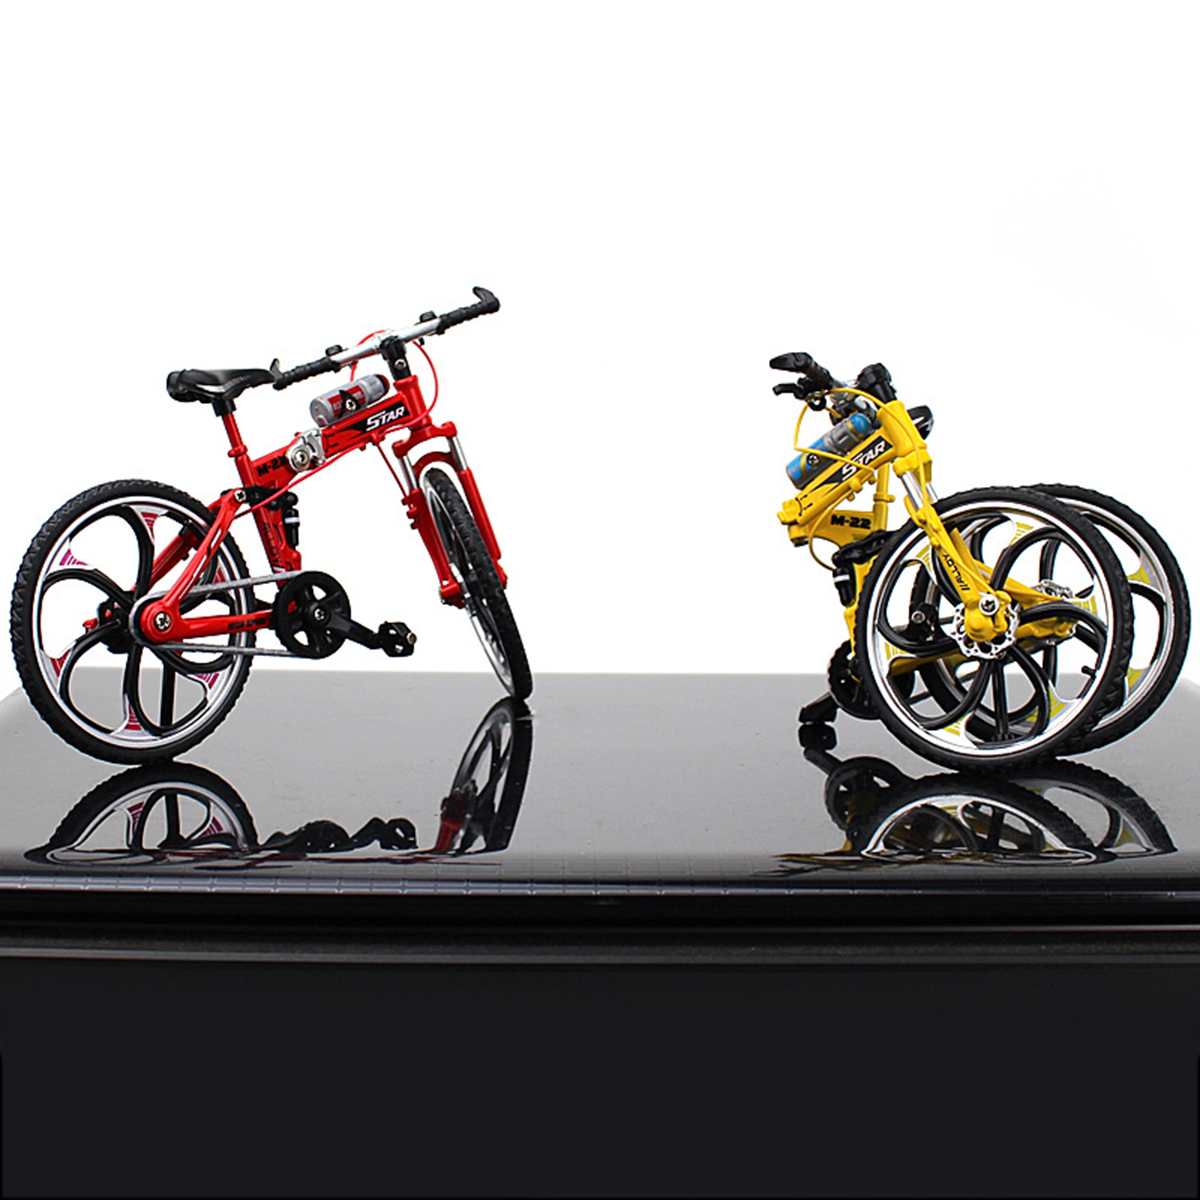 110-3D-Mini-Multi-color-Alloy-Mountain-Racing-Bicycle-Rotatable-Wheel-Diecast-Model-Toy-for-Decorati-1704789-11